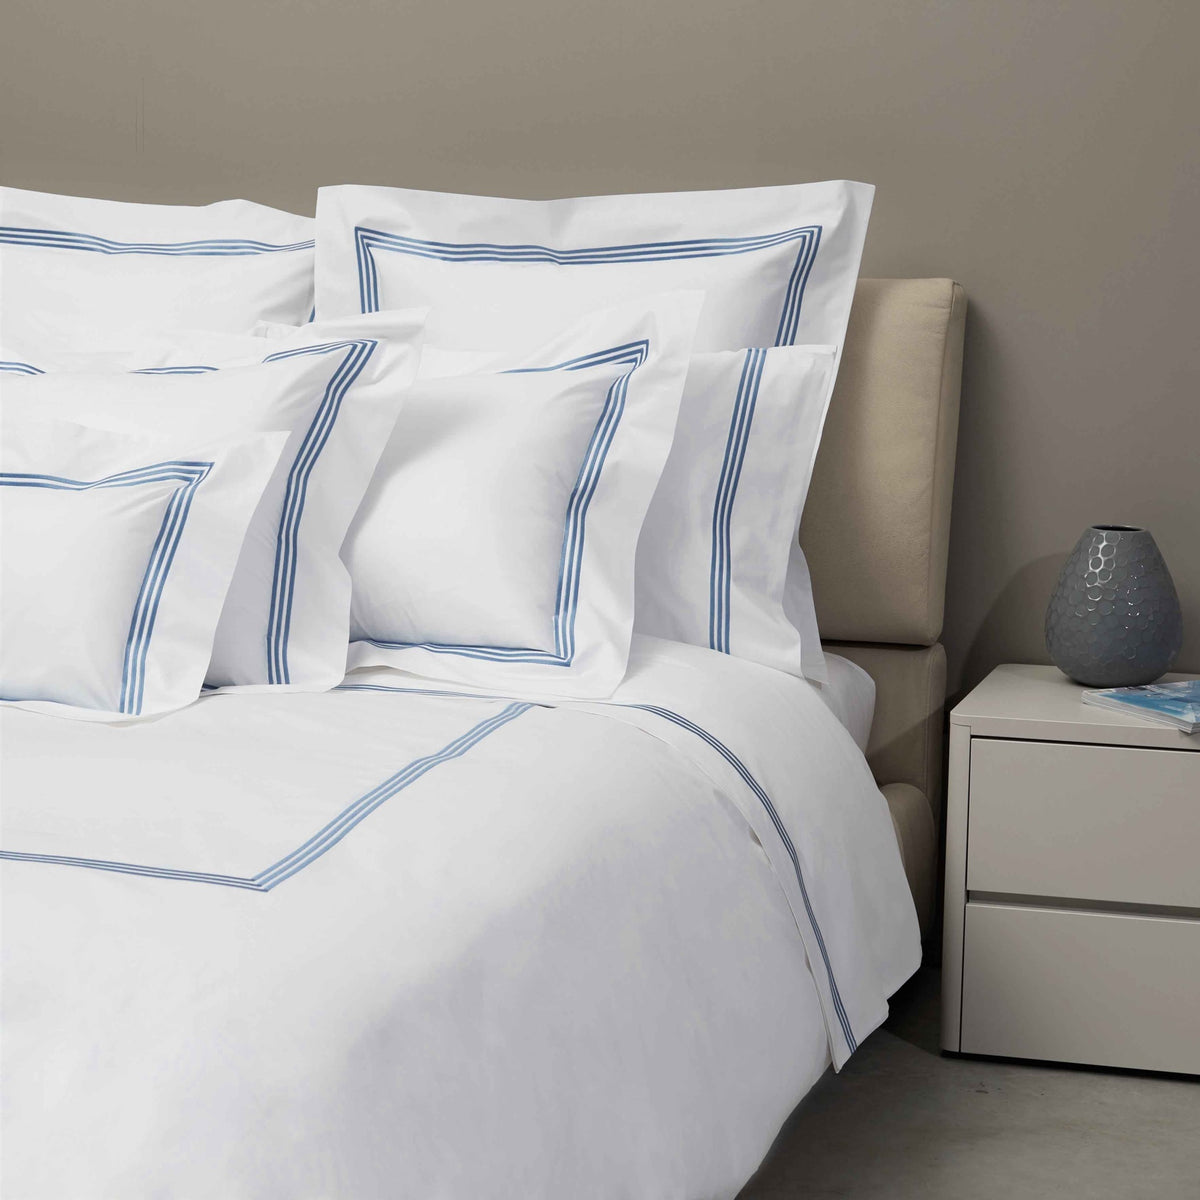 Bed Dressed in Signoria Platinum Percale Bedding in White/Airforce Blue Color